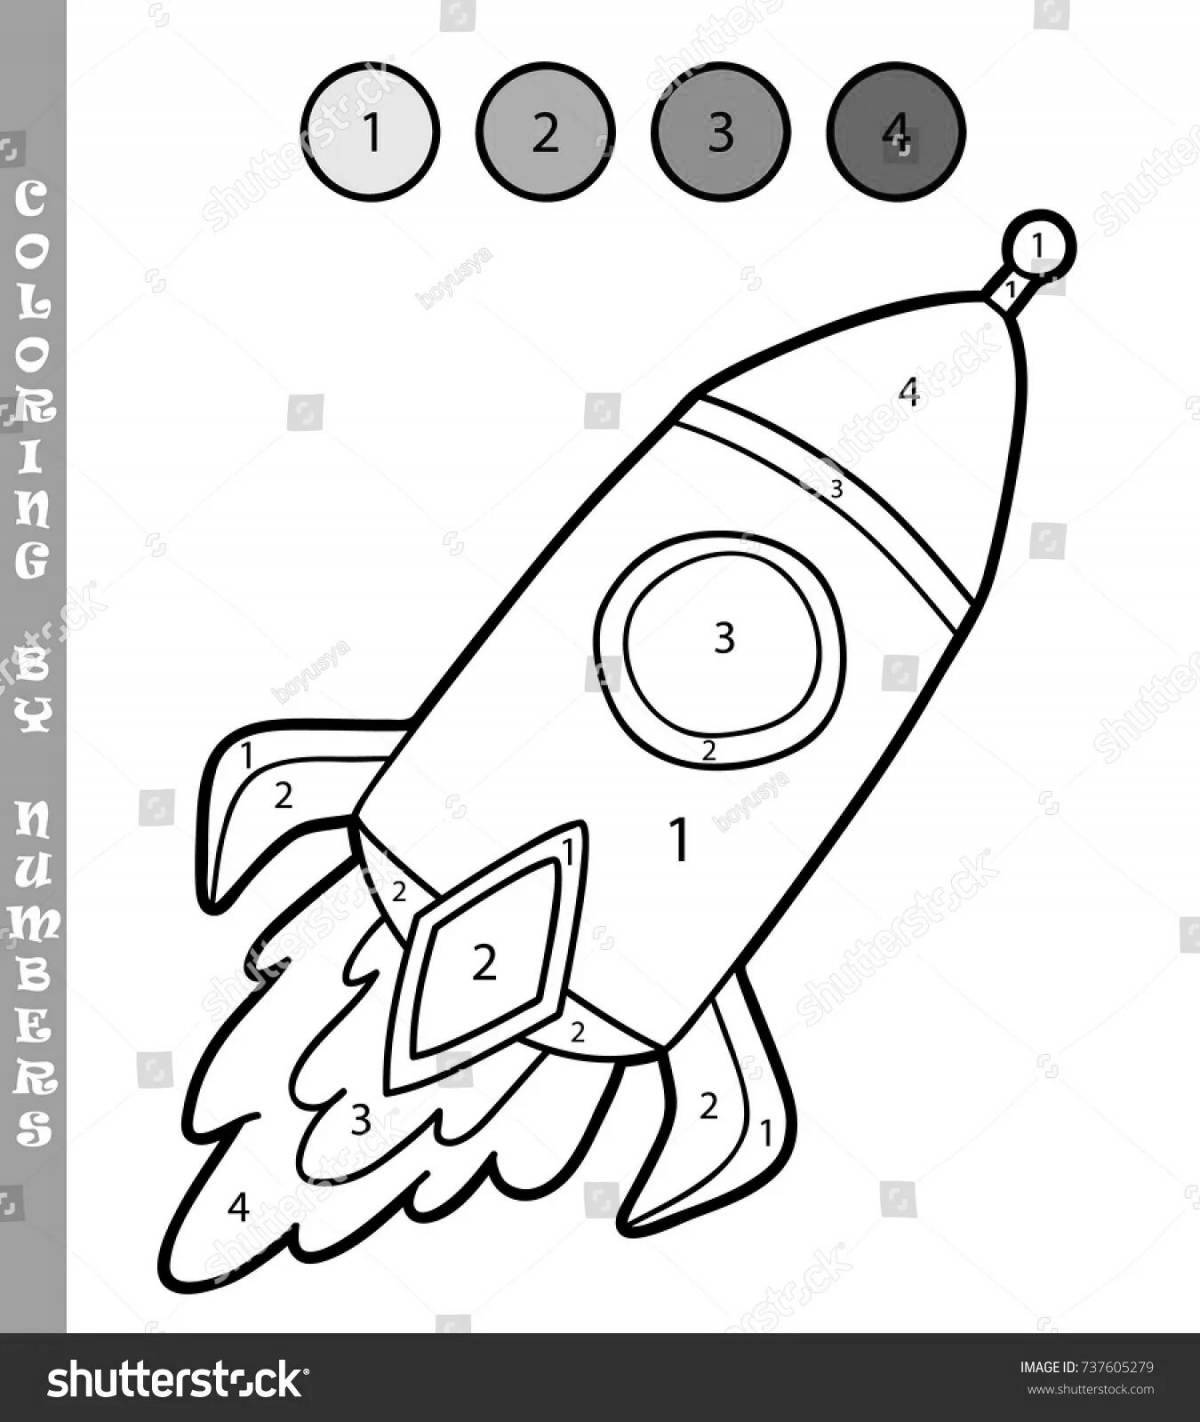 Great space by numbers coloring page